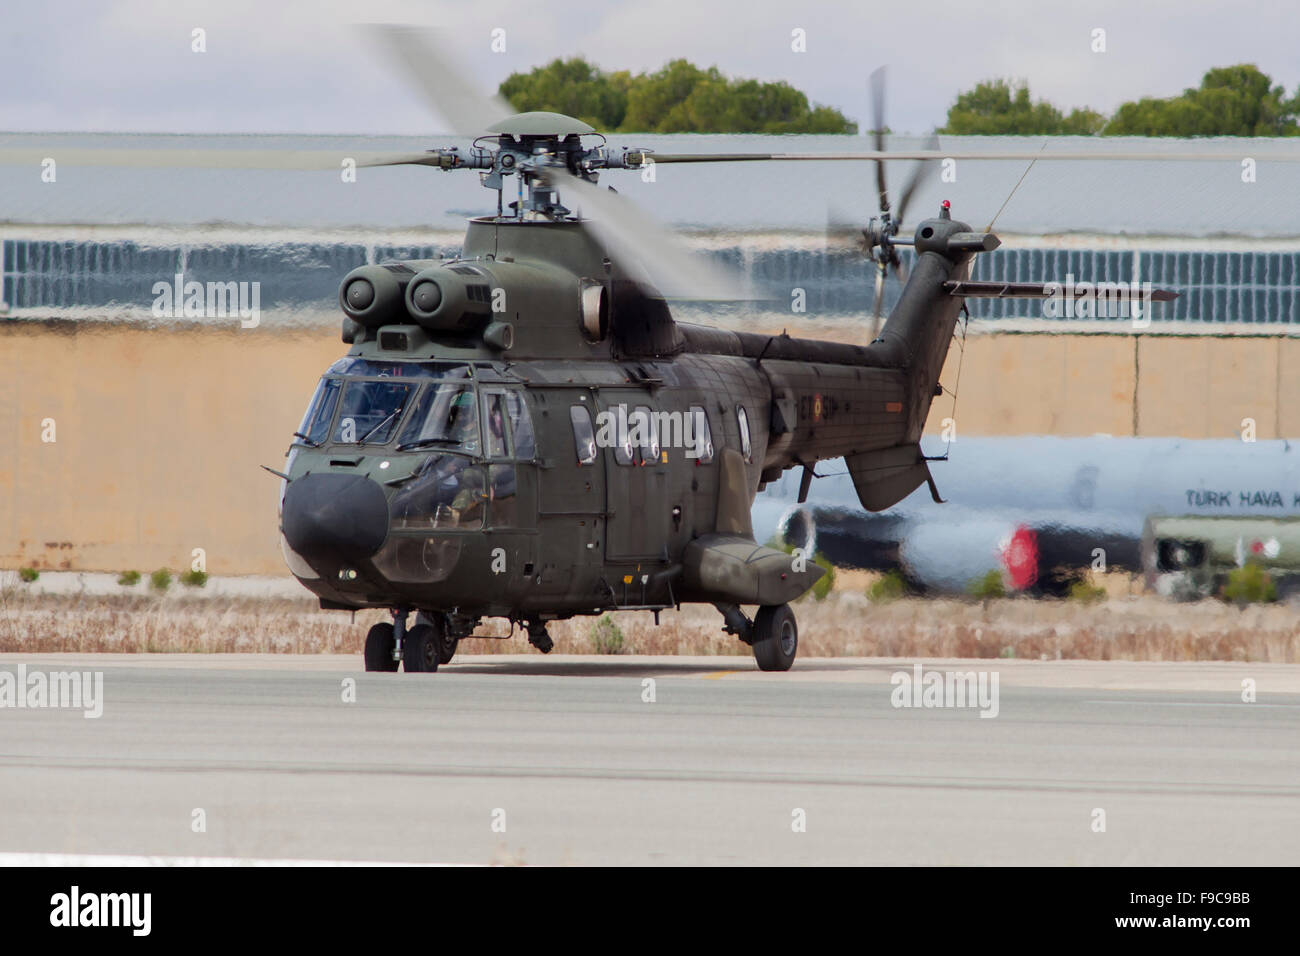 A Spanish Army AS332 Super Puma helicopter during NATO's Exercise Trident Juncture, Albacete, Spain. Stock Photo